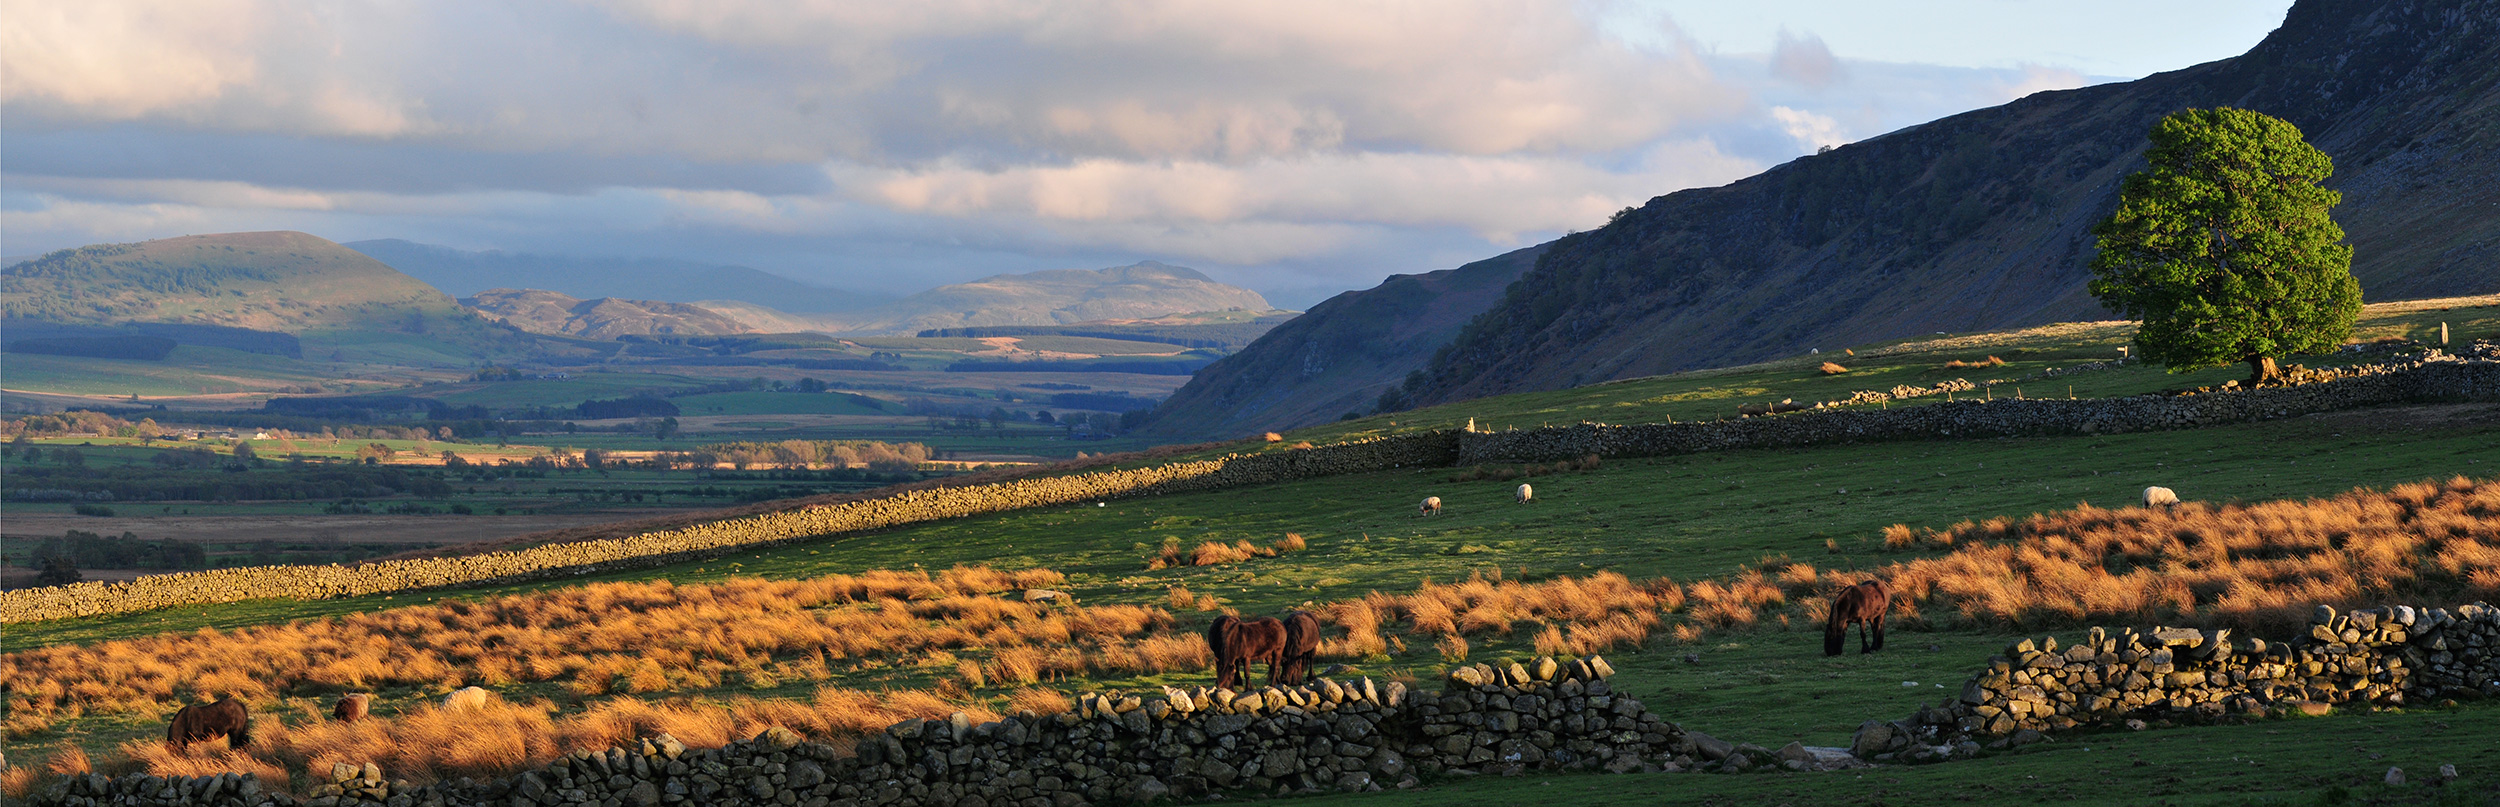 Evening light looking down Mungrisdale. Carrock Fell on the right.